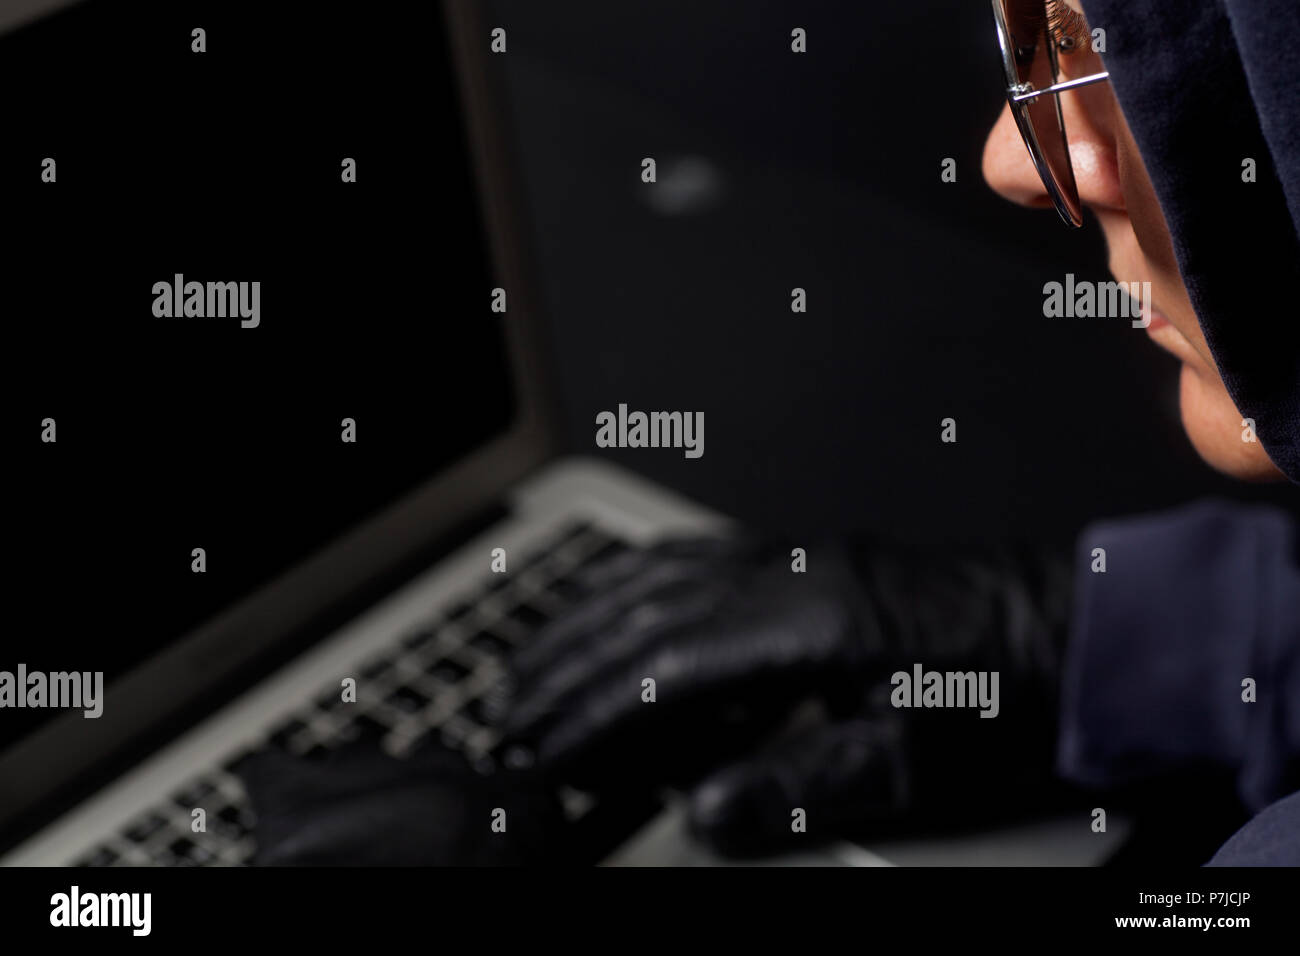 Hacker on a laptop.Concept of internet criminal hacking Stock Photo